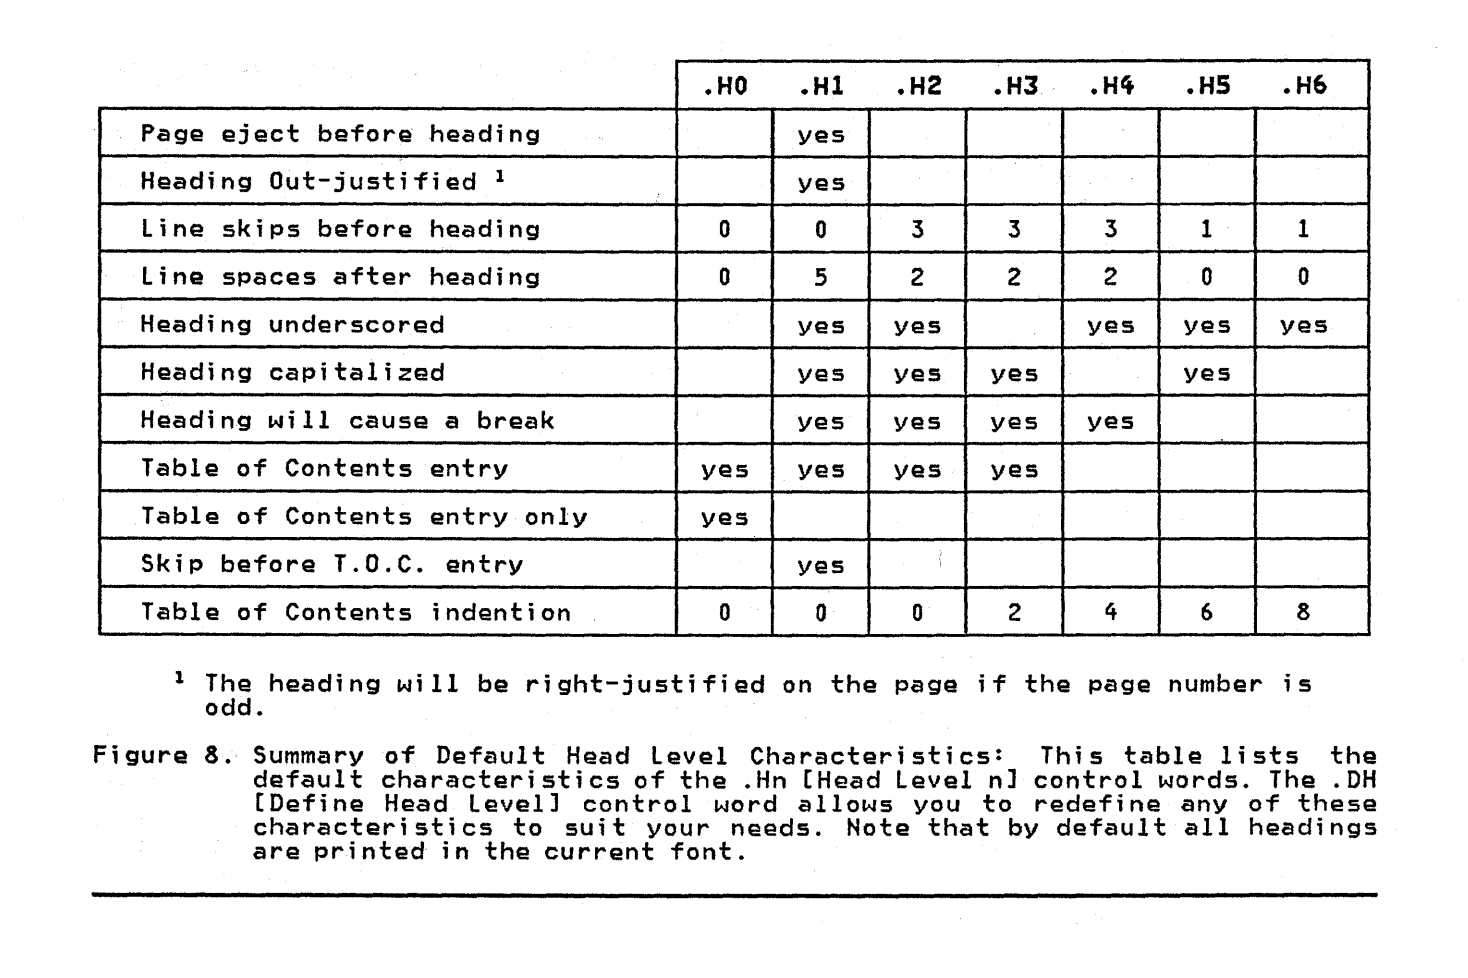 Summary table of the default head level characteristics, from H0 to H6.